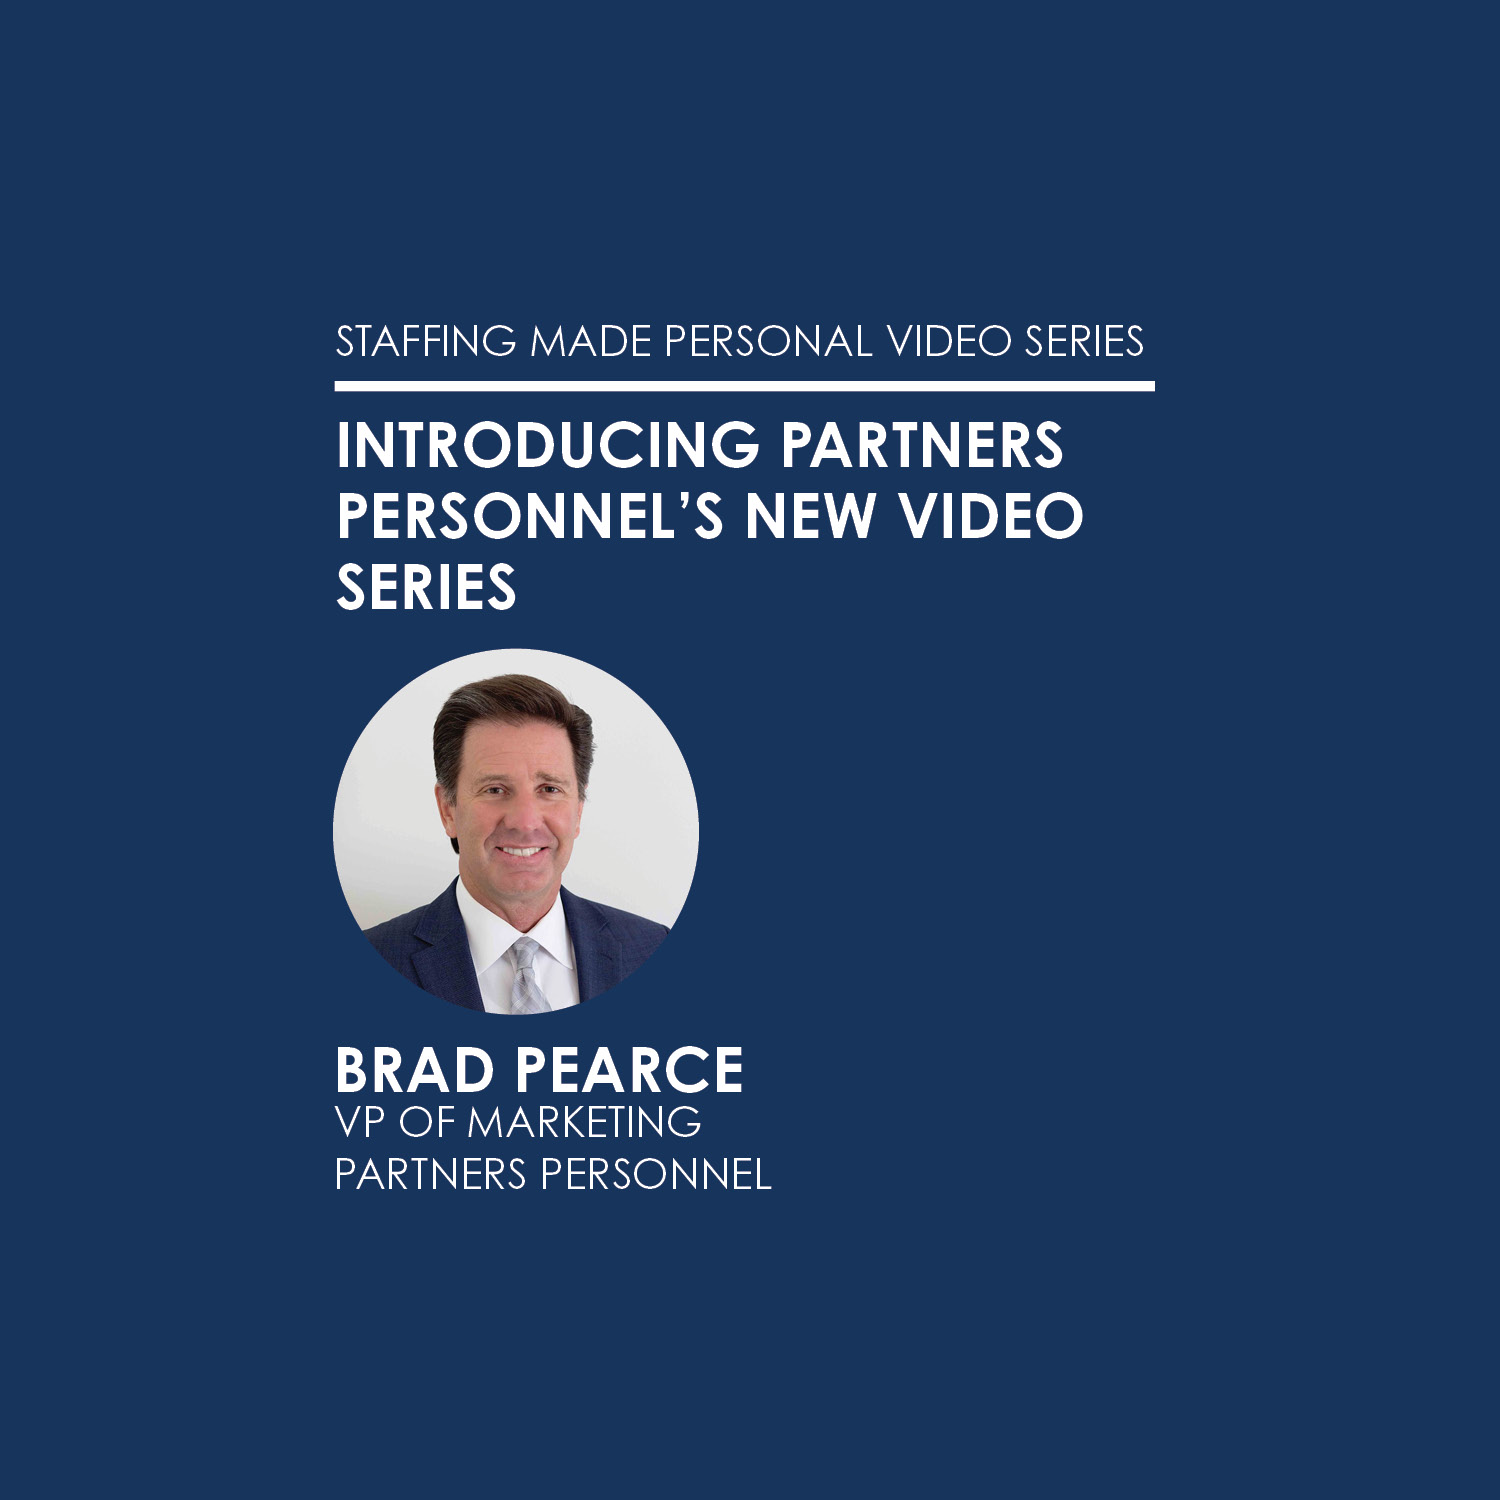 Staffing Made Personal Video Series